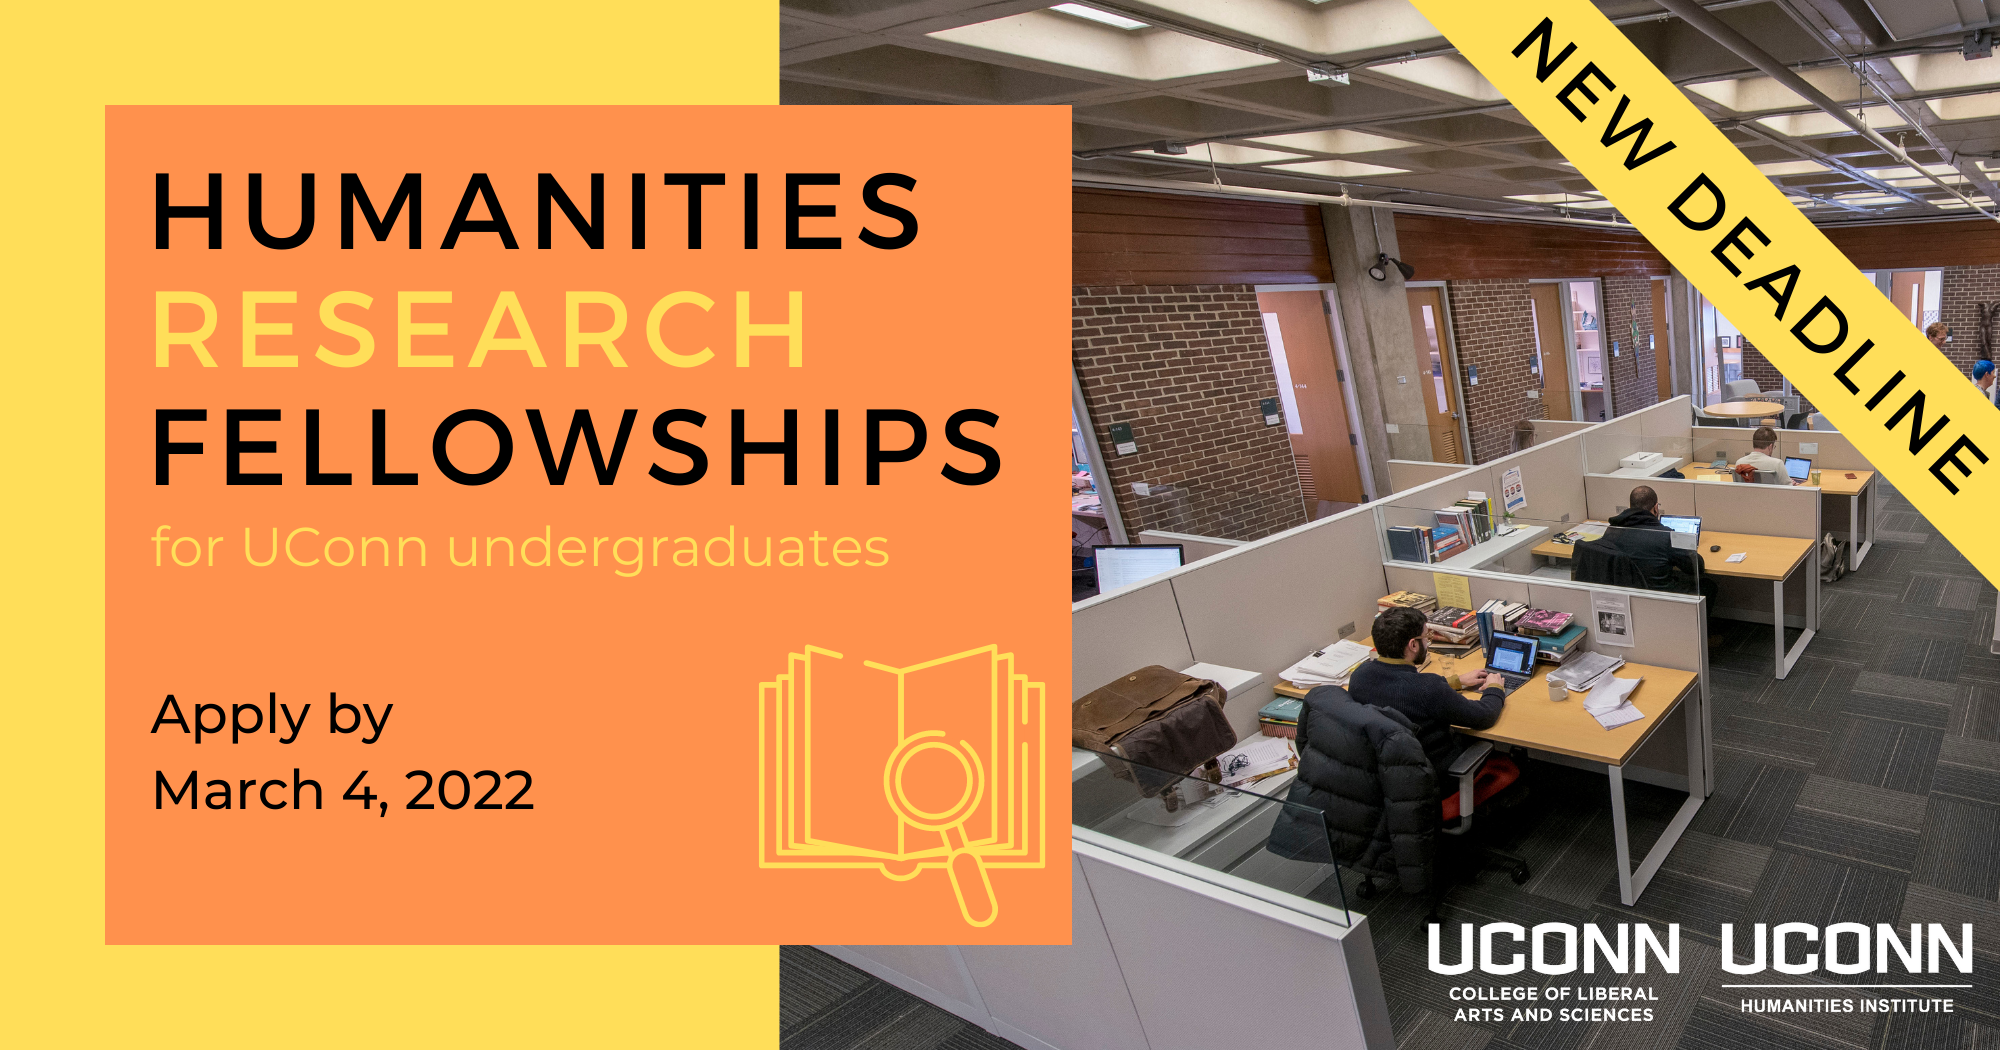 NEW DEADLINE: Humanities research fellowships for UConn undergraduates. Apply by March 4, 2022.